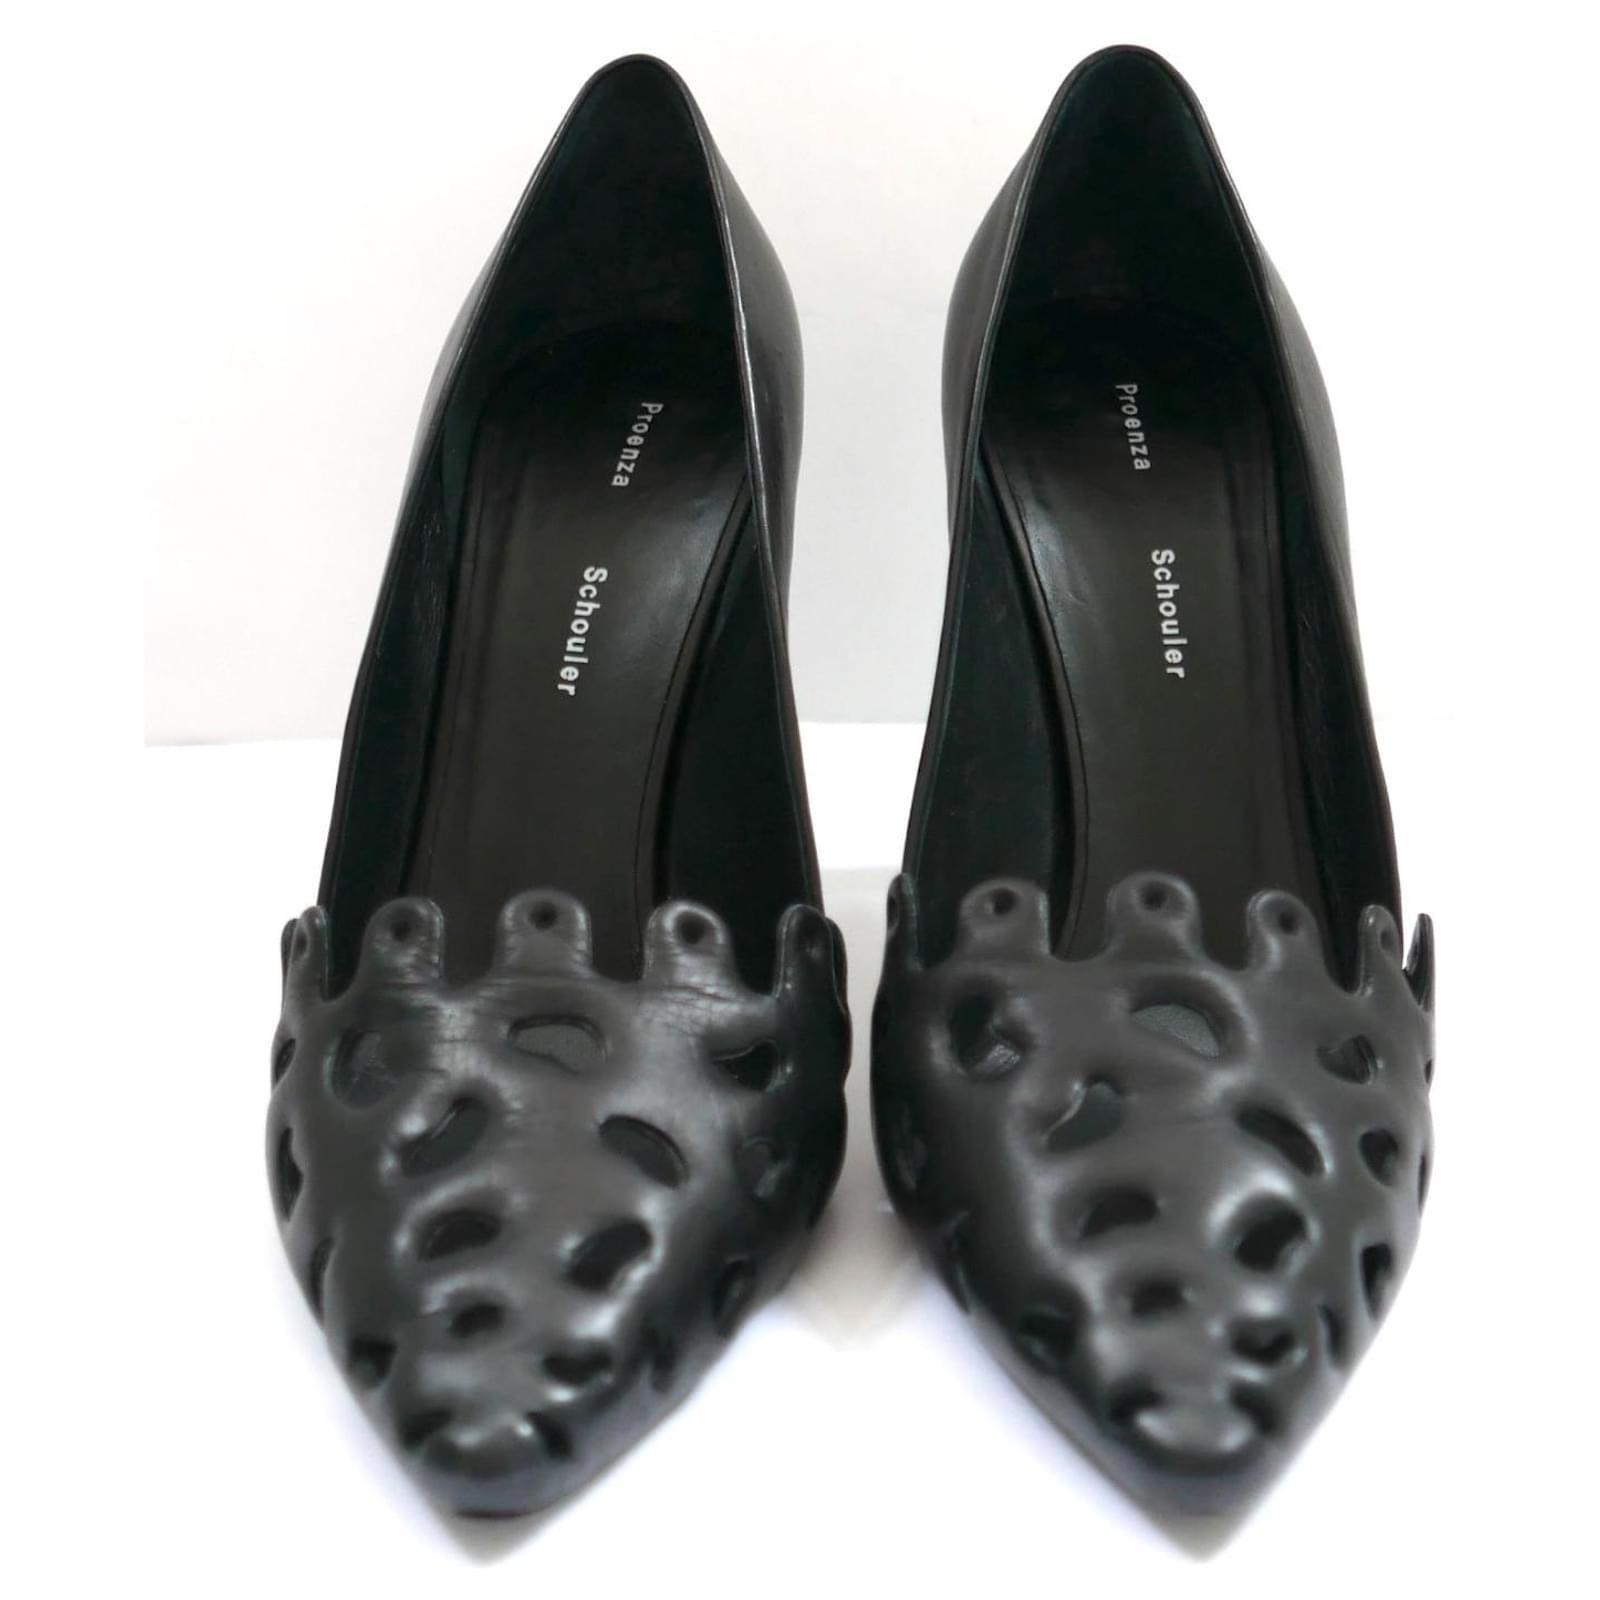 Darkly chic Proezna Schouler pumps - bought for £595 and worn once. Made from smooth black leather, they have arty Gaudi inspired cut-out fronts and sturdy stiletto heels. Size 38.5. Measure approx - 10” heel to toe inside and heel is 4”.
